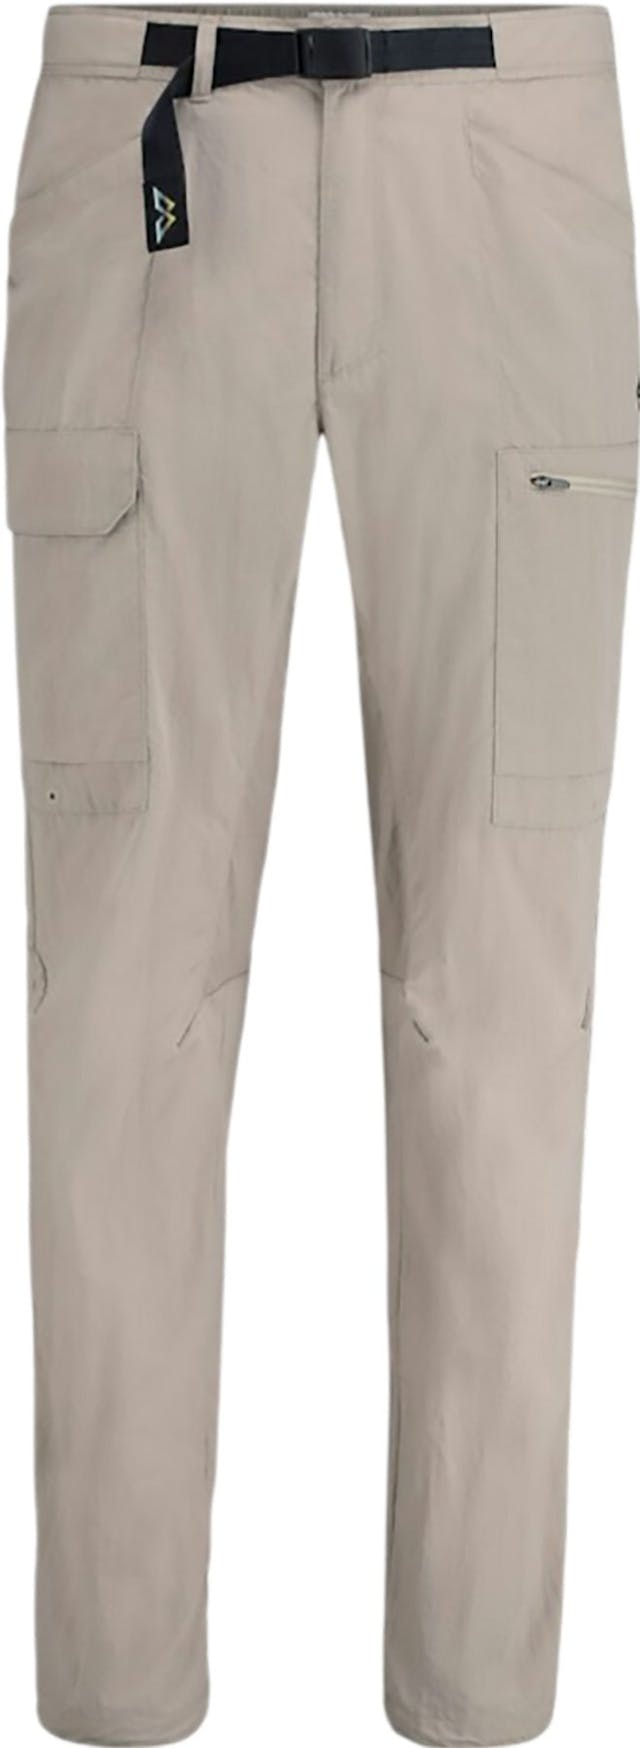 Product image for EVRY-Day Pants - Men's